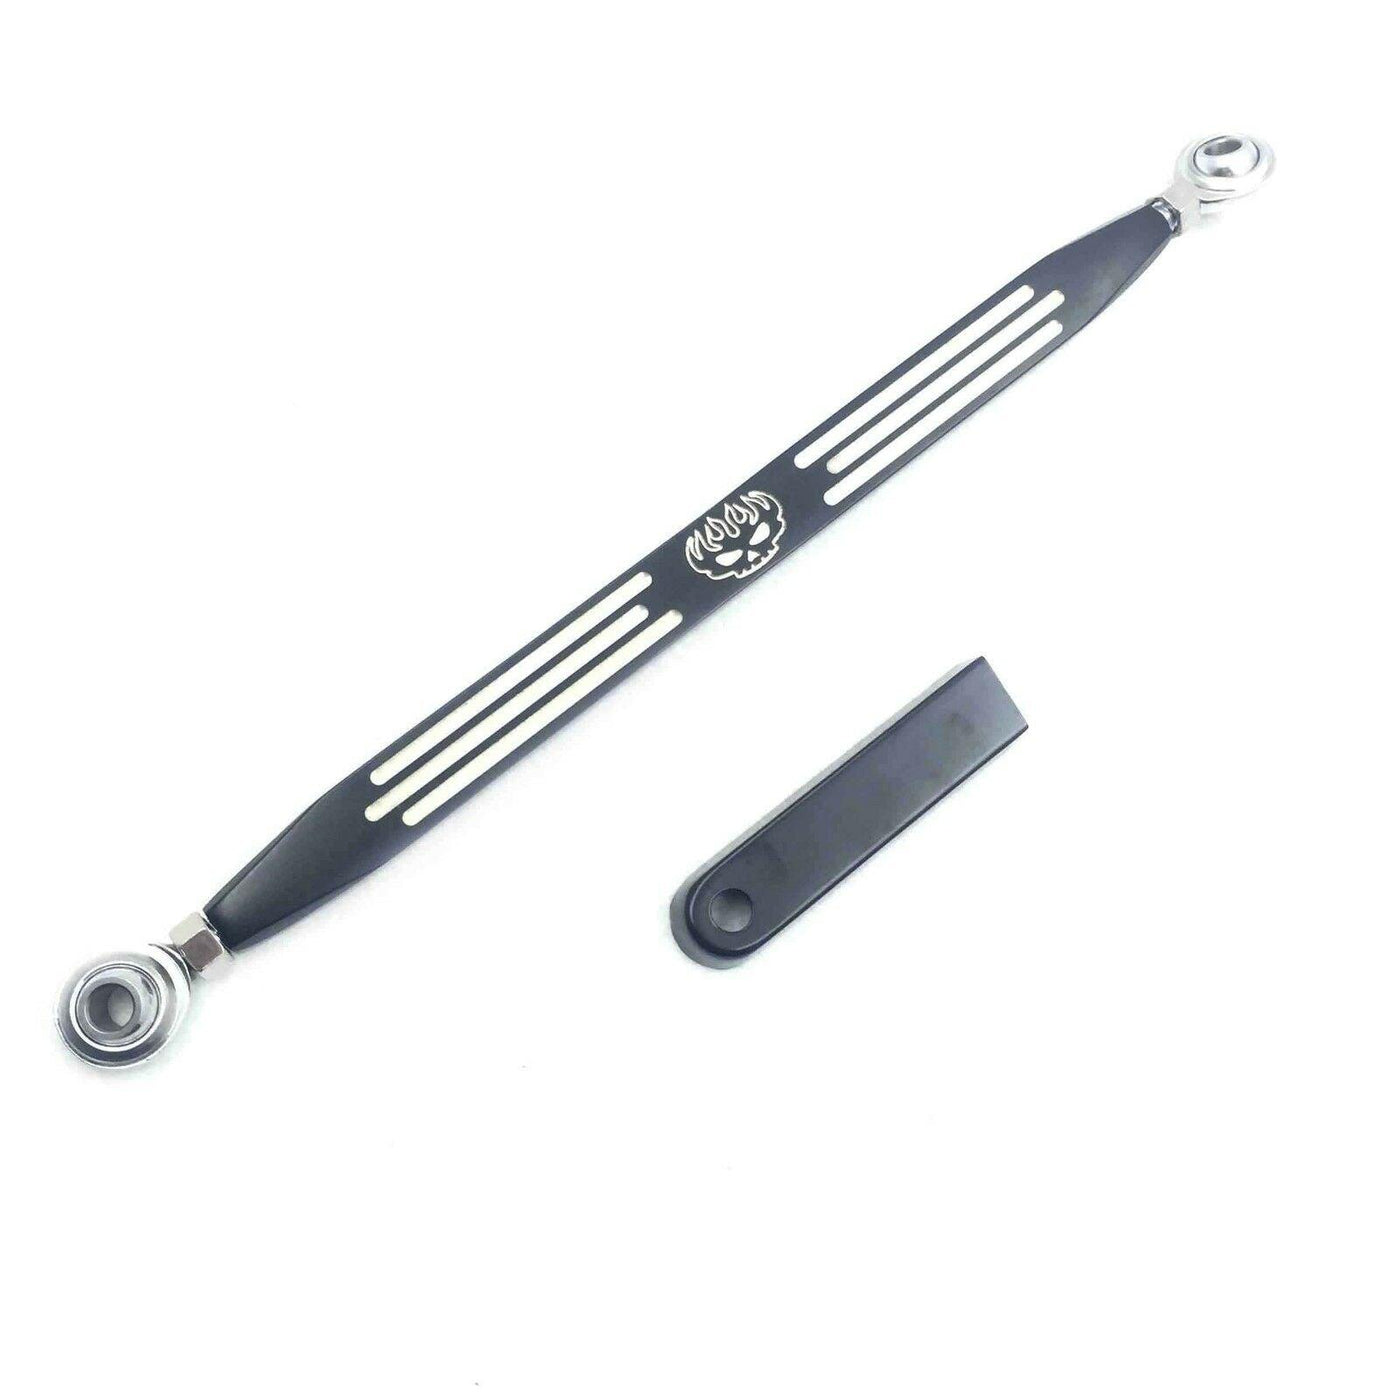 1986-2015 CNC.BLACK Flame Gear Shift Linkage for Harley Davidson New - Moto Life Products